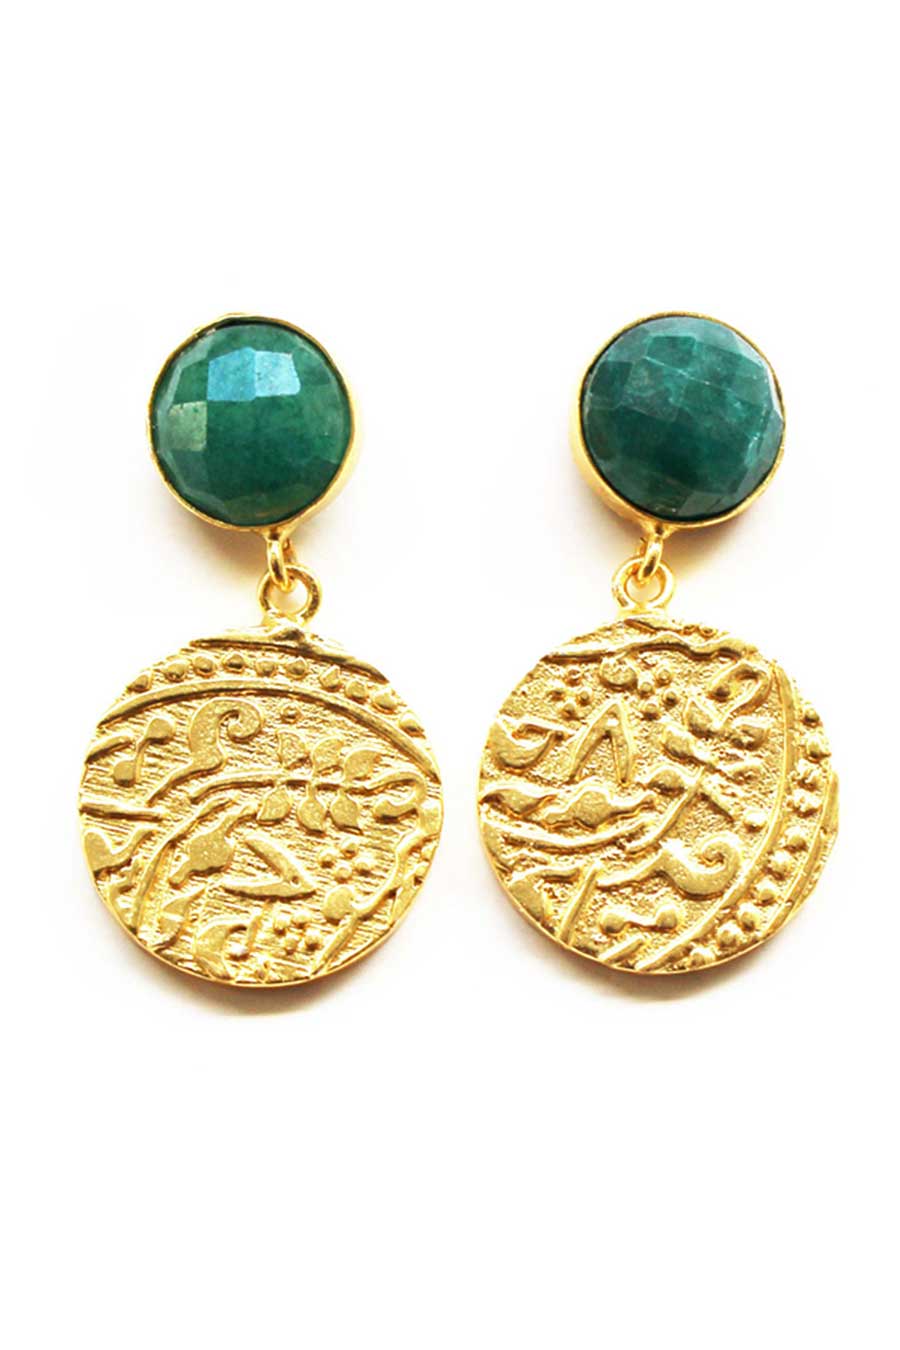 Vintage Coin Drop Earrings with Emerald Quartz